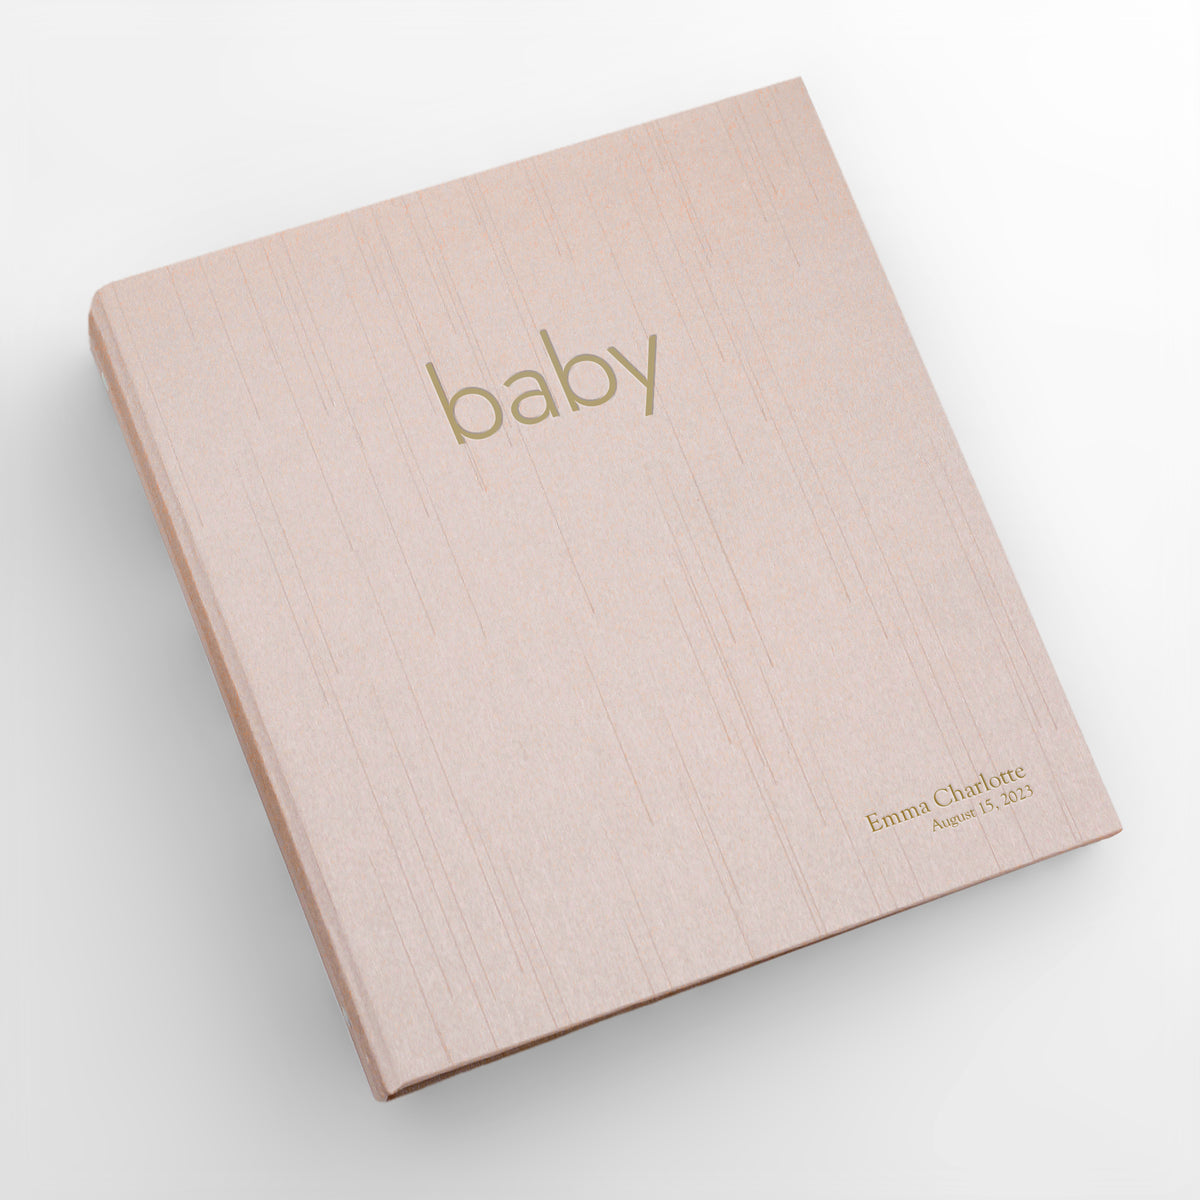 Personalized Baby Memory Binder | Cover: Blush Pink Silk | Select Your Own Pages